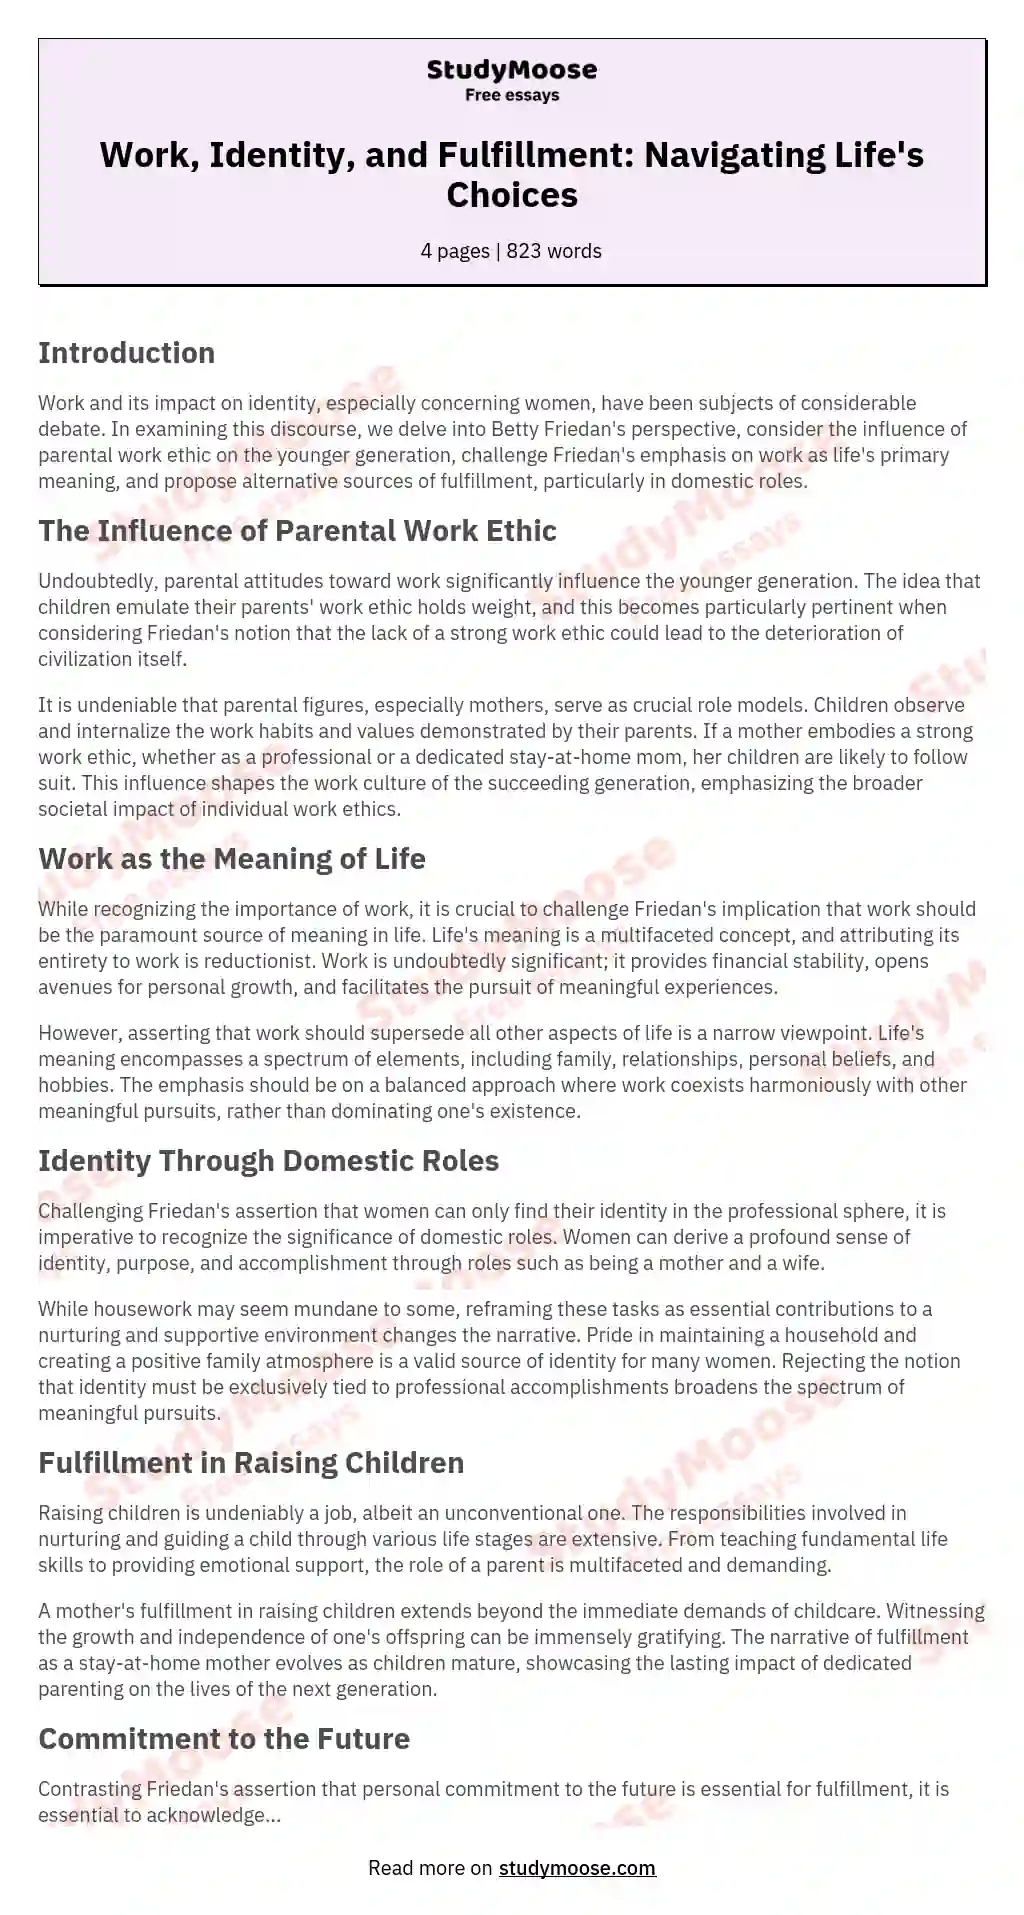 Parental Work Ethic: Shaping the Work Culture of the Next Generation essay